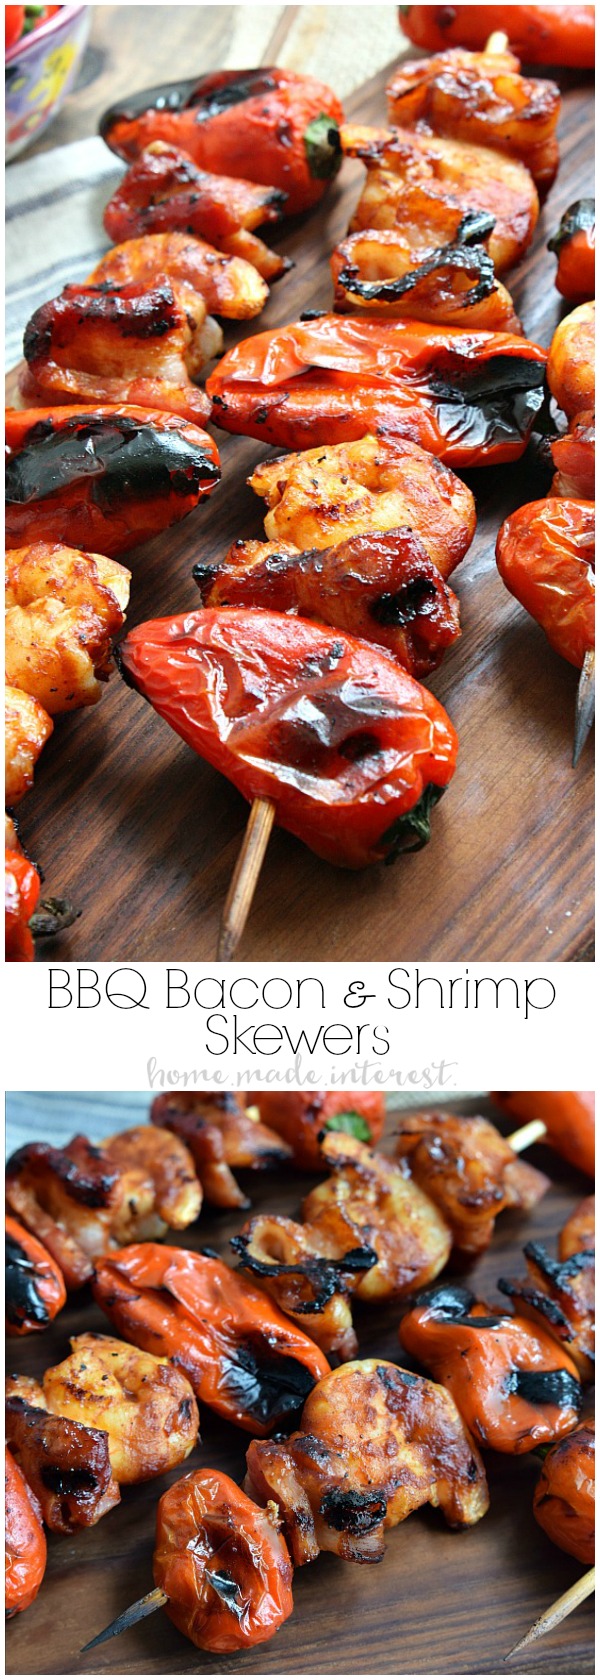 Fire up the grill for this awesome kabob recipe! This grilled BBQ bacon and shrimp skewers are layers of sweet peppers, shrimp and bacon, glazed with your favorite BBQ sauce and grilled over an open flame for a smokey flavor that is out of this world. 